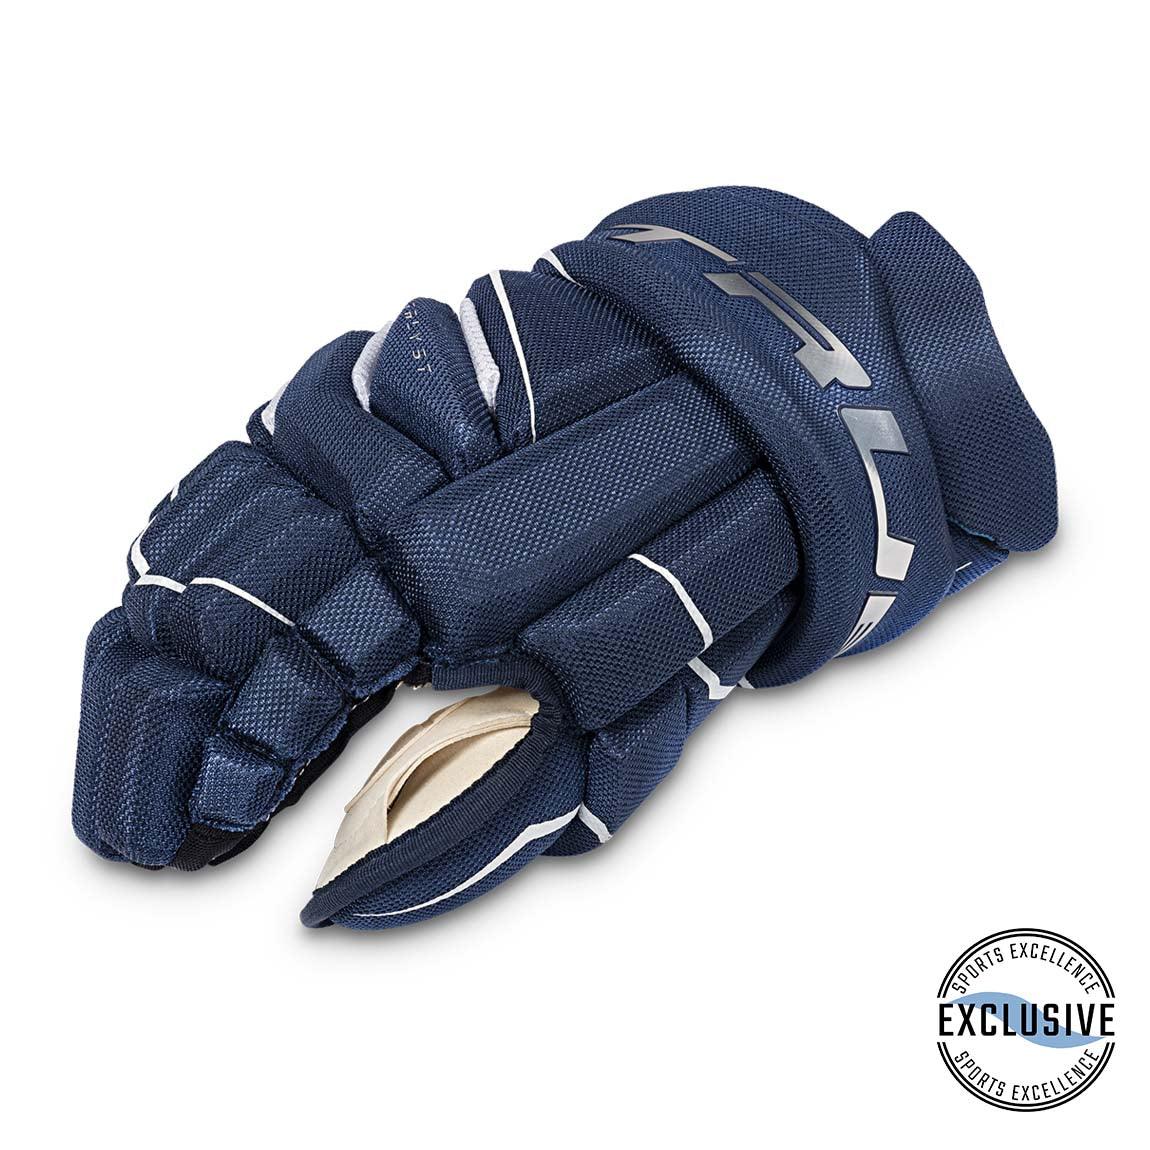 CATALYST XSE Tapered Glove - Sports Excellence